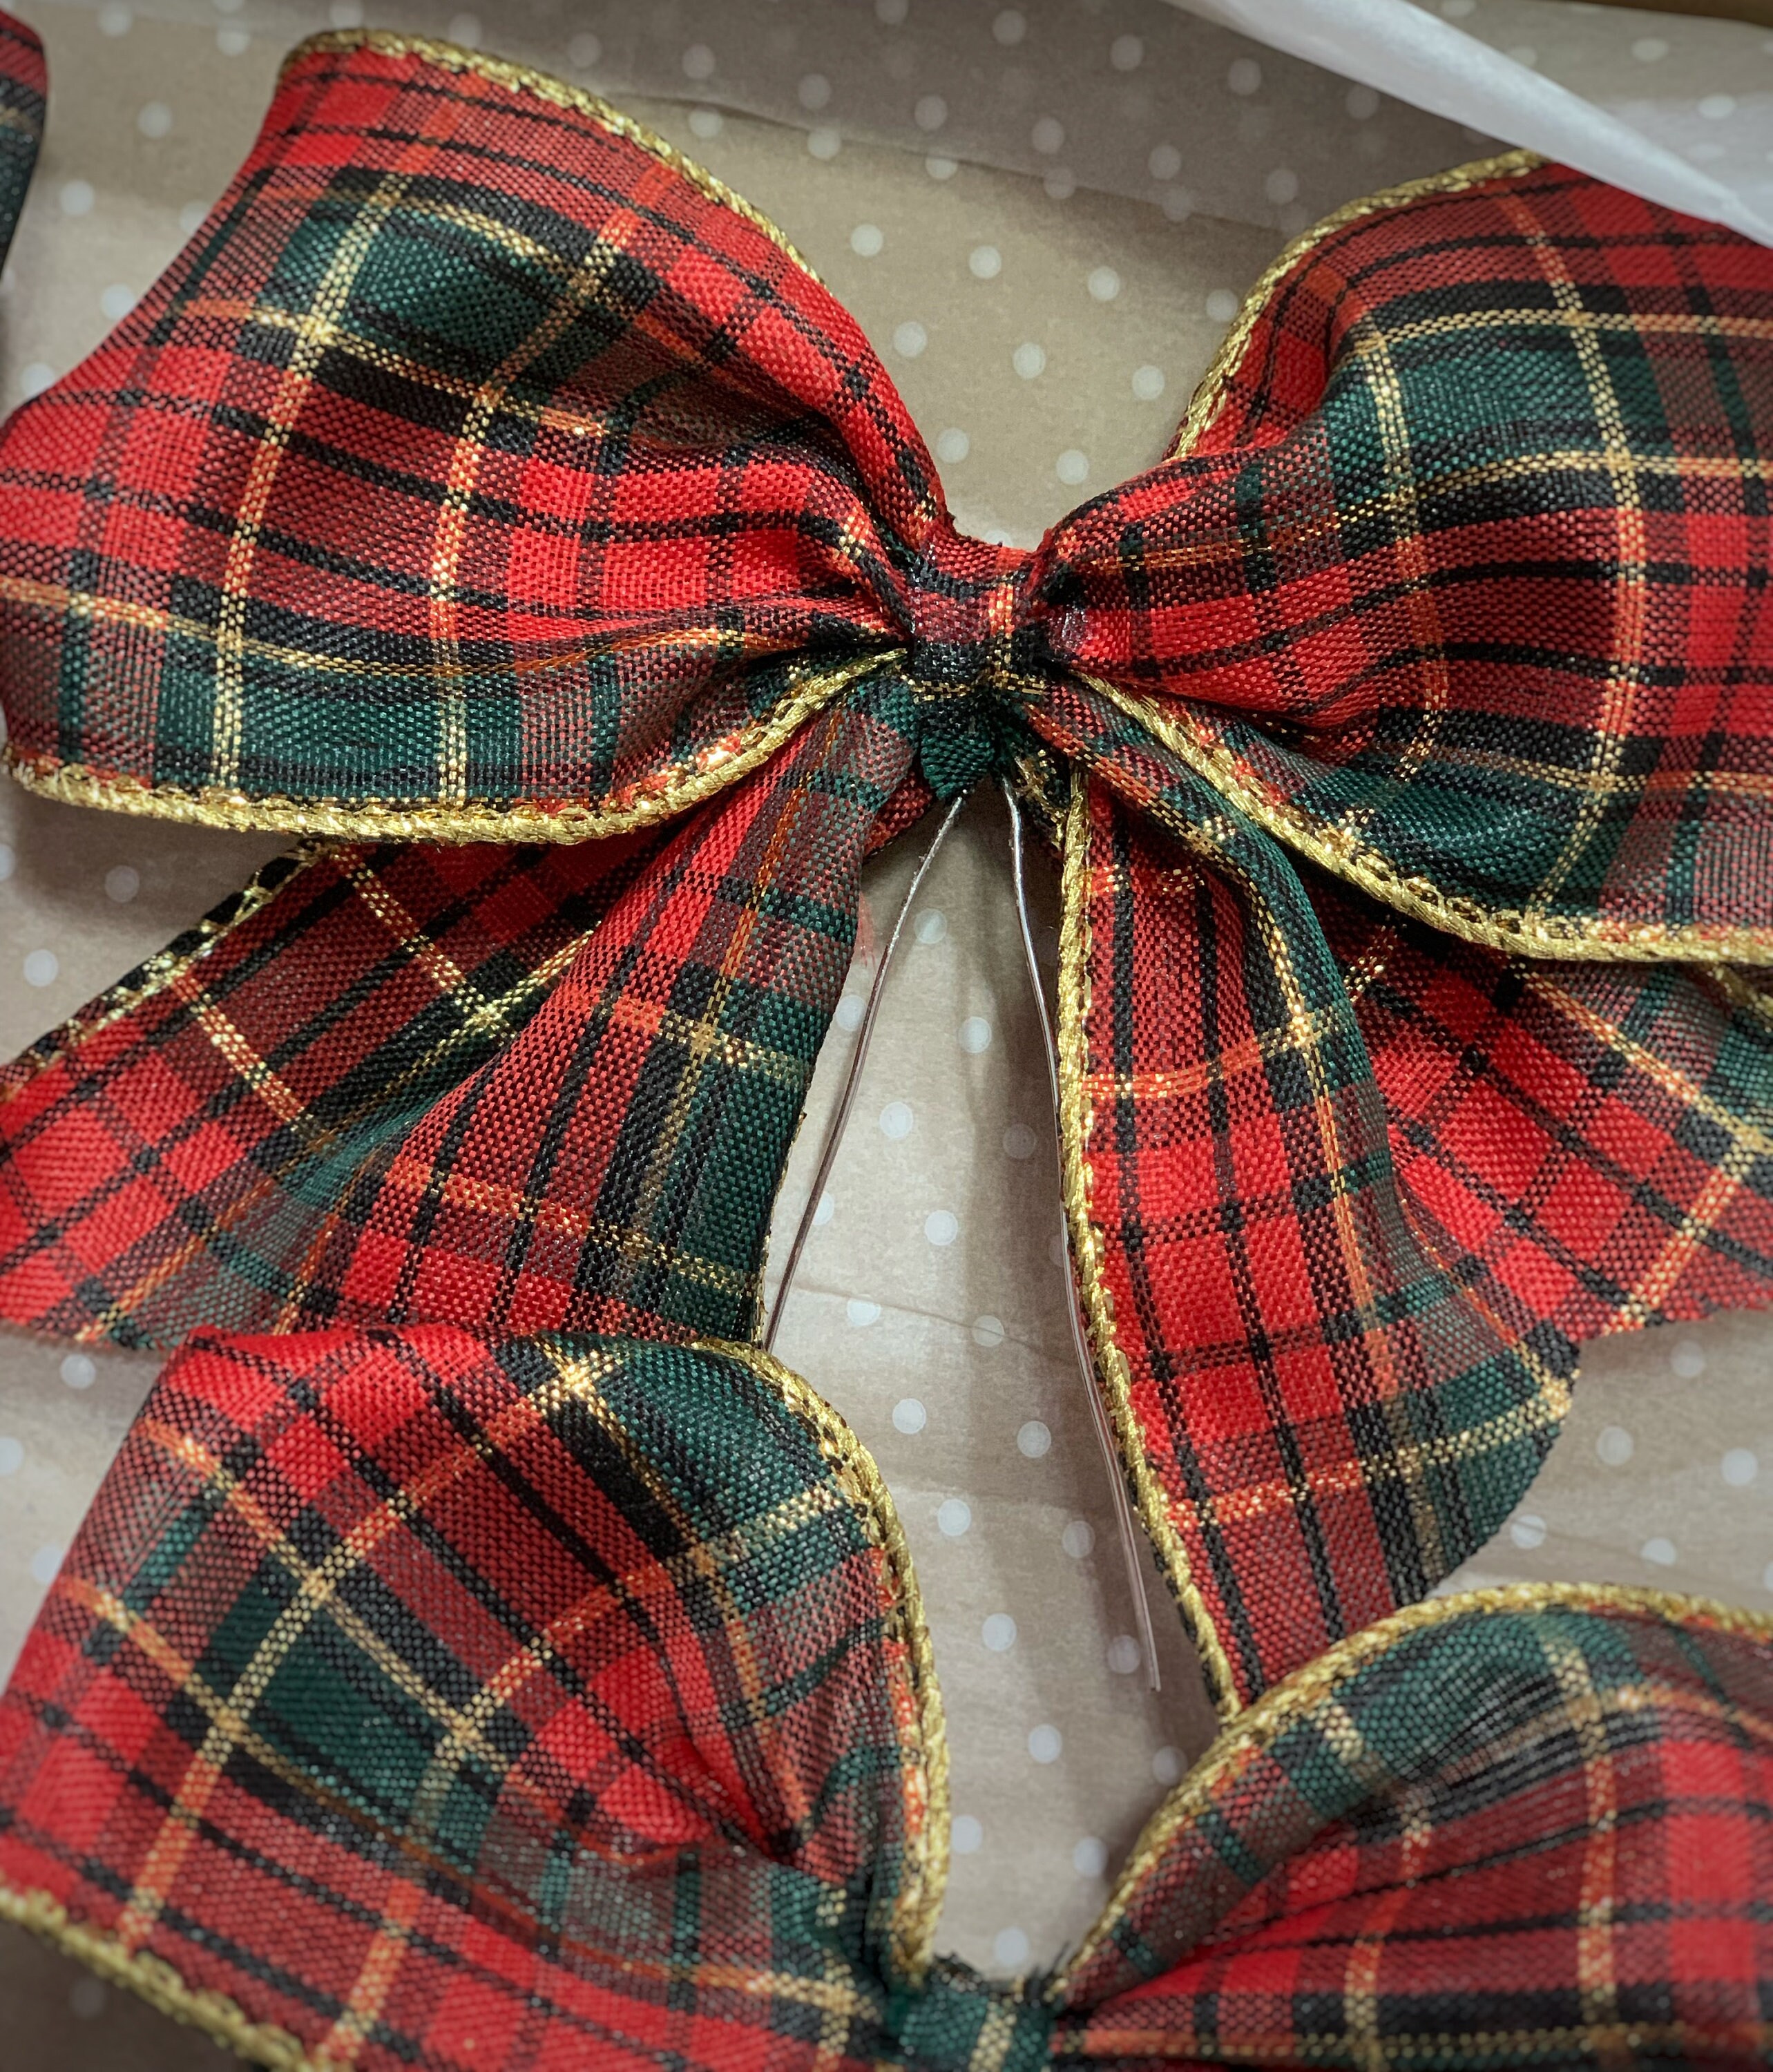 Presents Gifts Christmas Trees Burns Night Wreaths Ribbon Queen 3 Wide Stewart Tartan Double Bows Wedding Tie on or Regular Design Decorations Stewart Tartan Bow only, 20 Floristry 